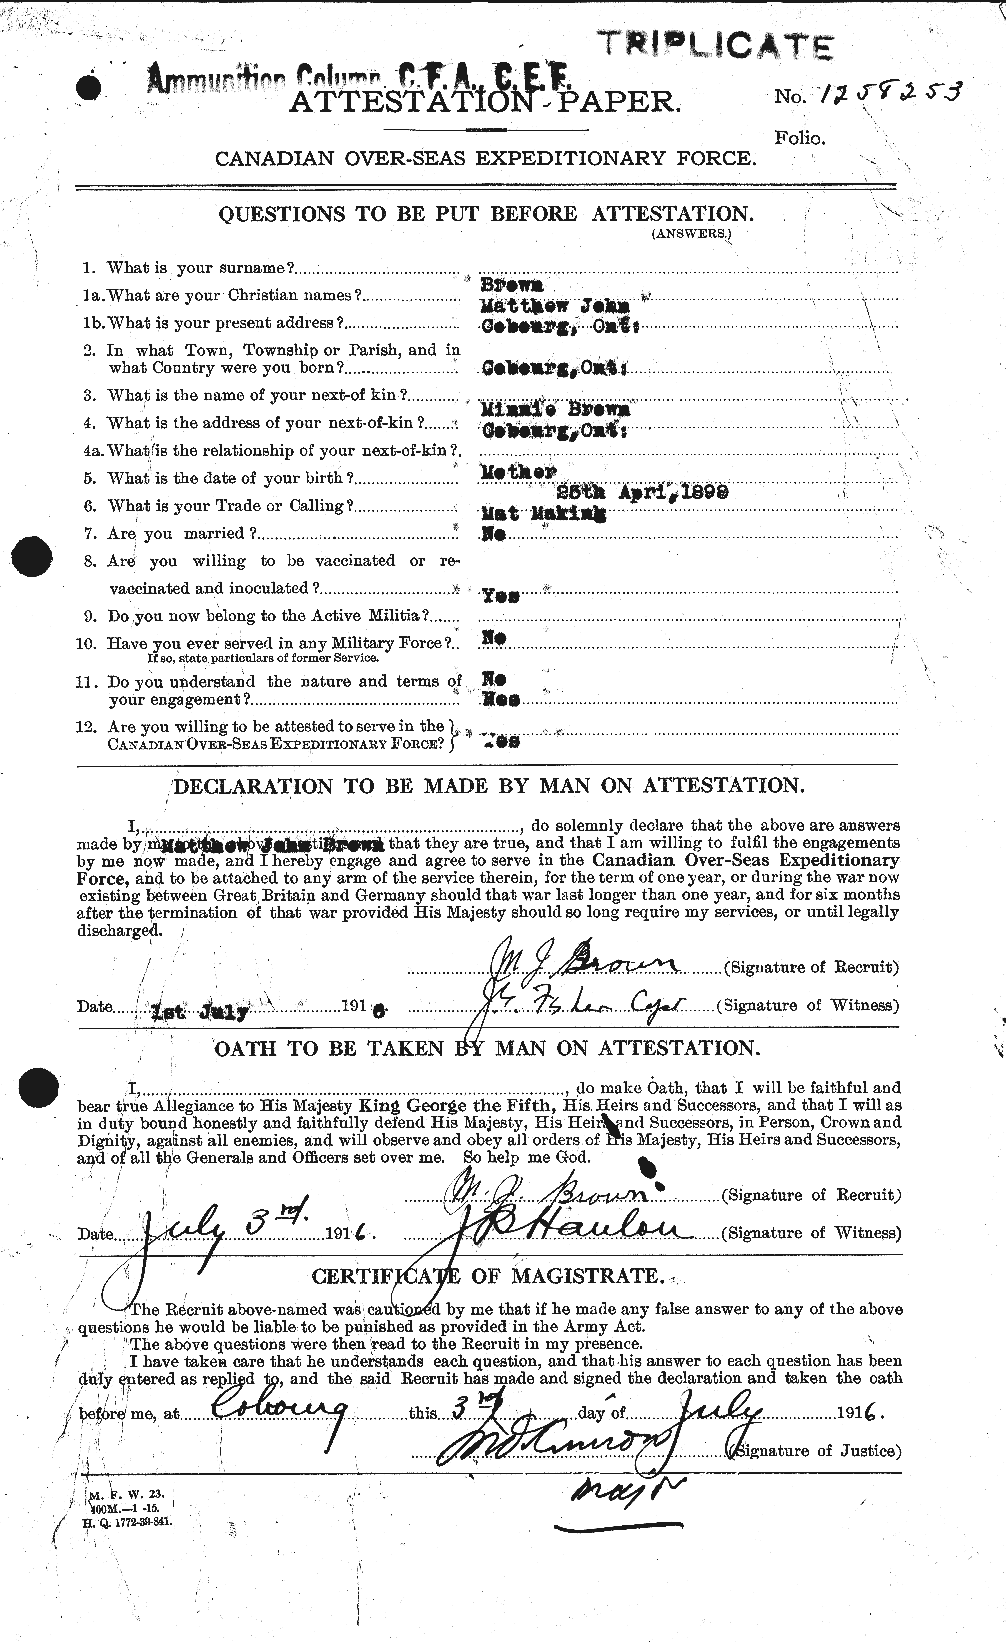 Personnel Records of the First World War - CEF 267038a